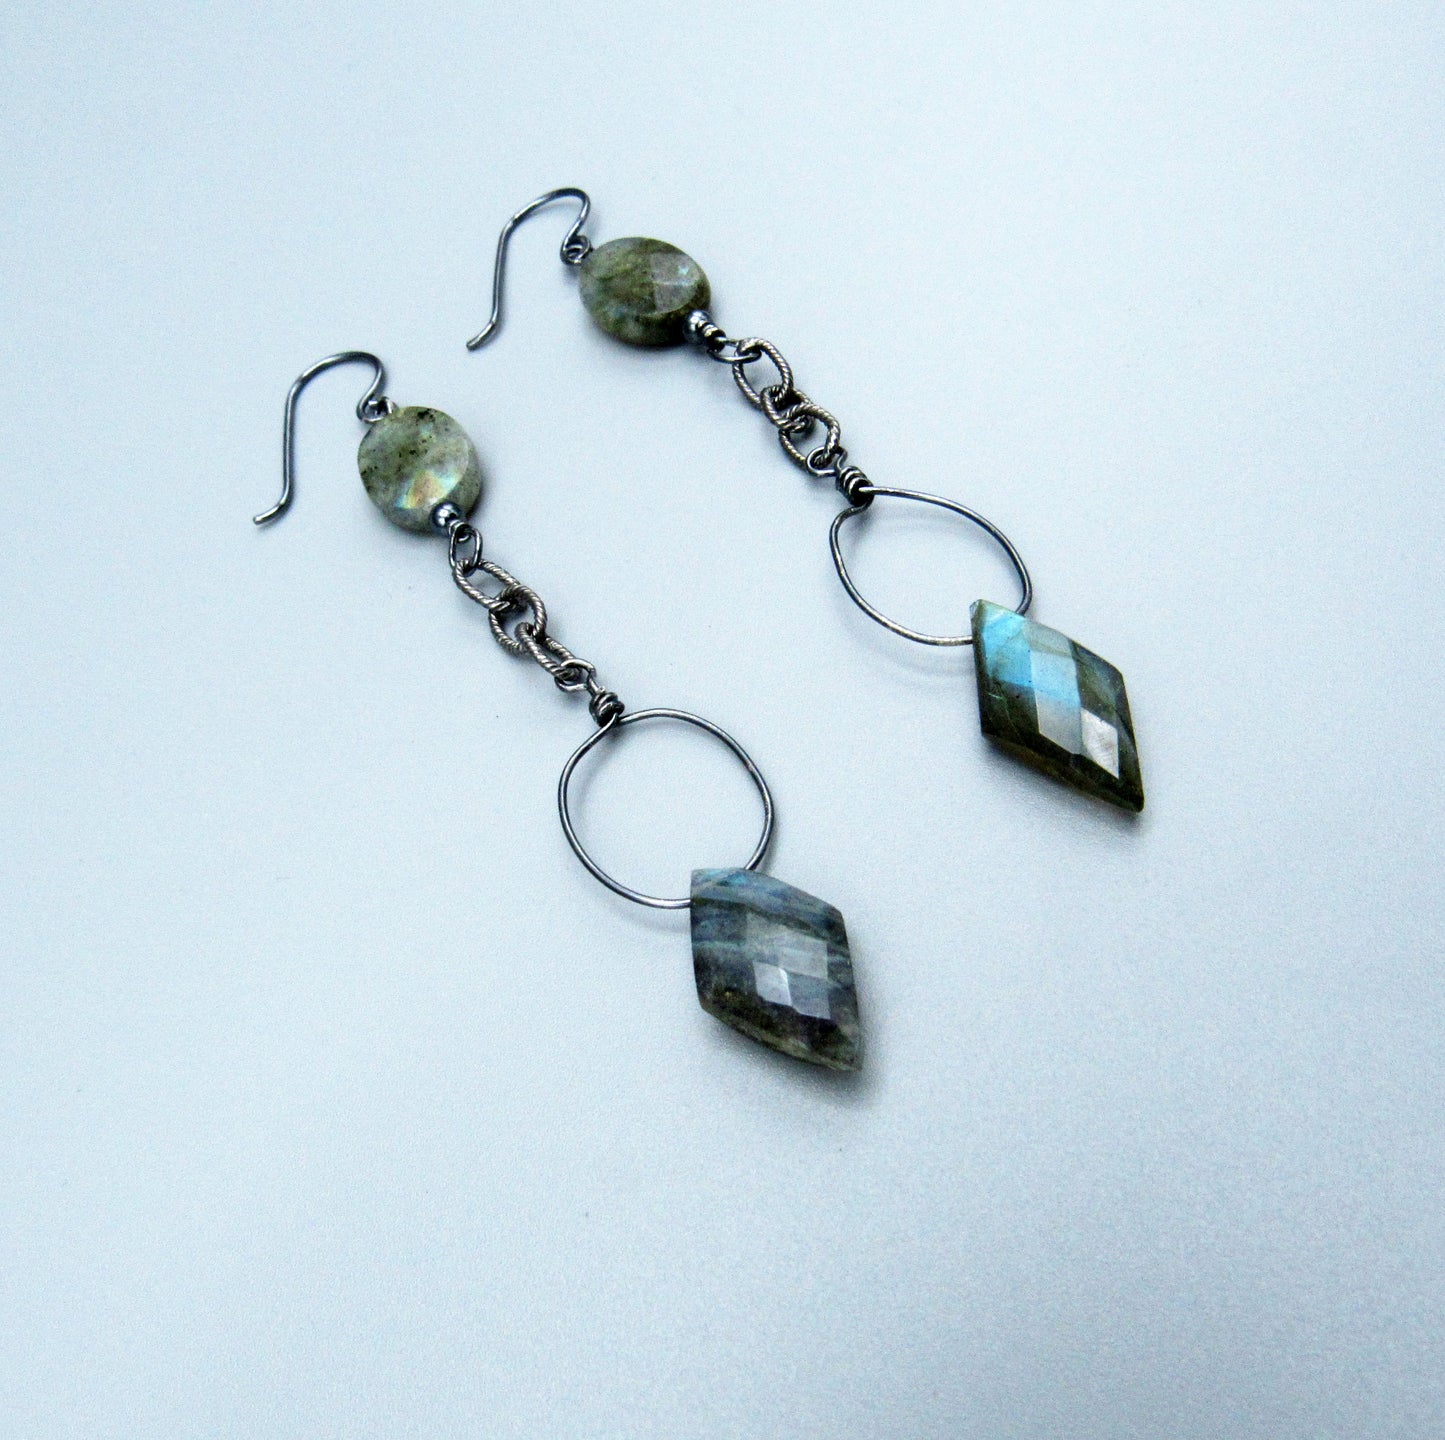 Labradorite and Oxidized Sterling Silver Chain Drop Earrings